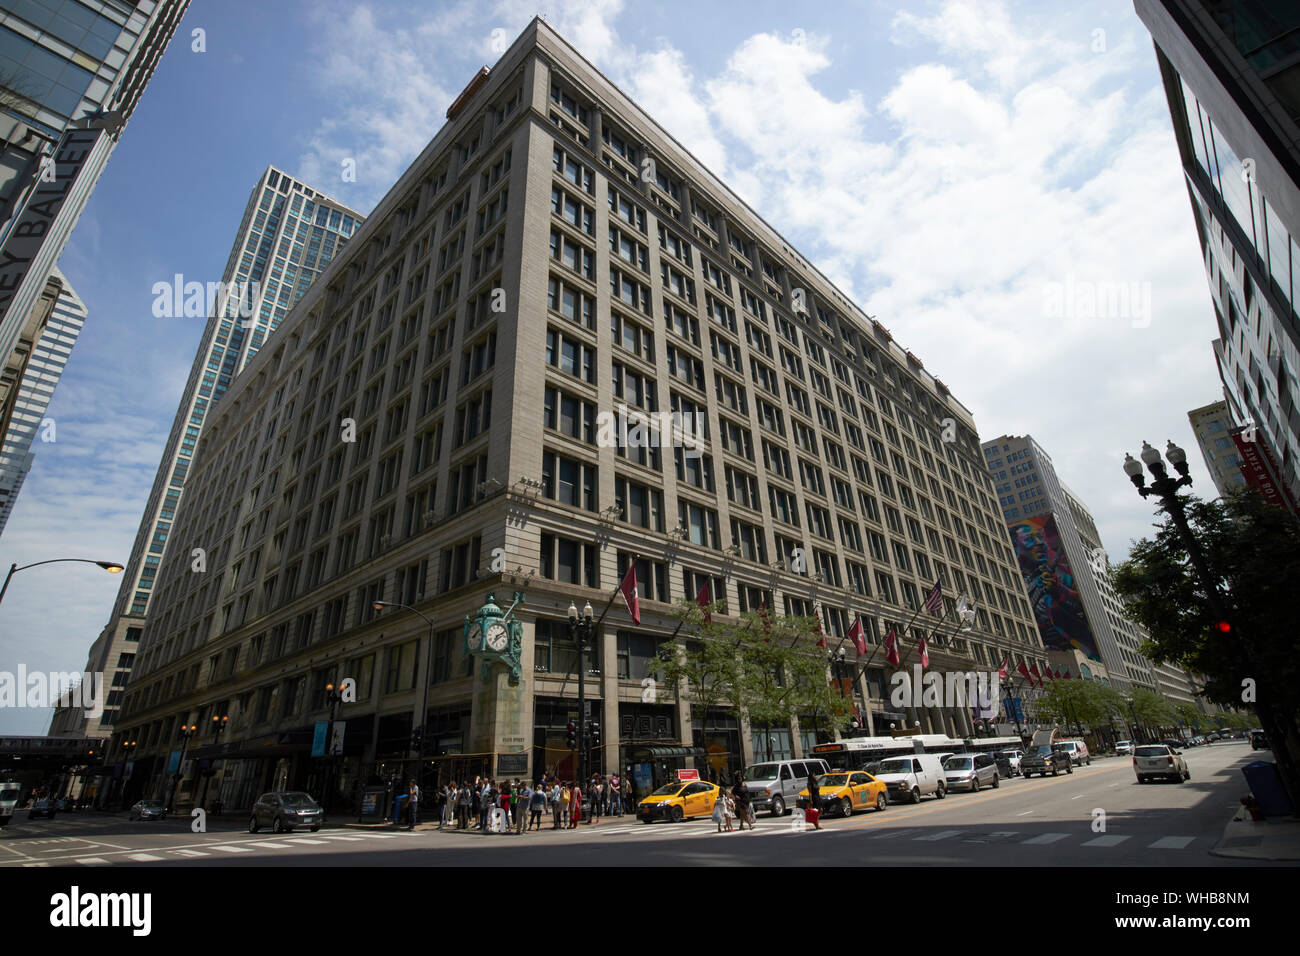 Macys on state street the marshall fields department store chicago illinois united states of america Stock Photo